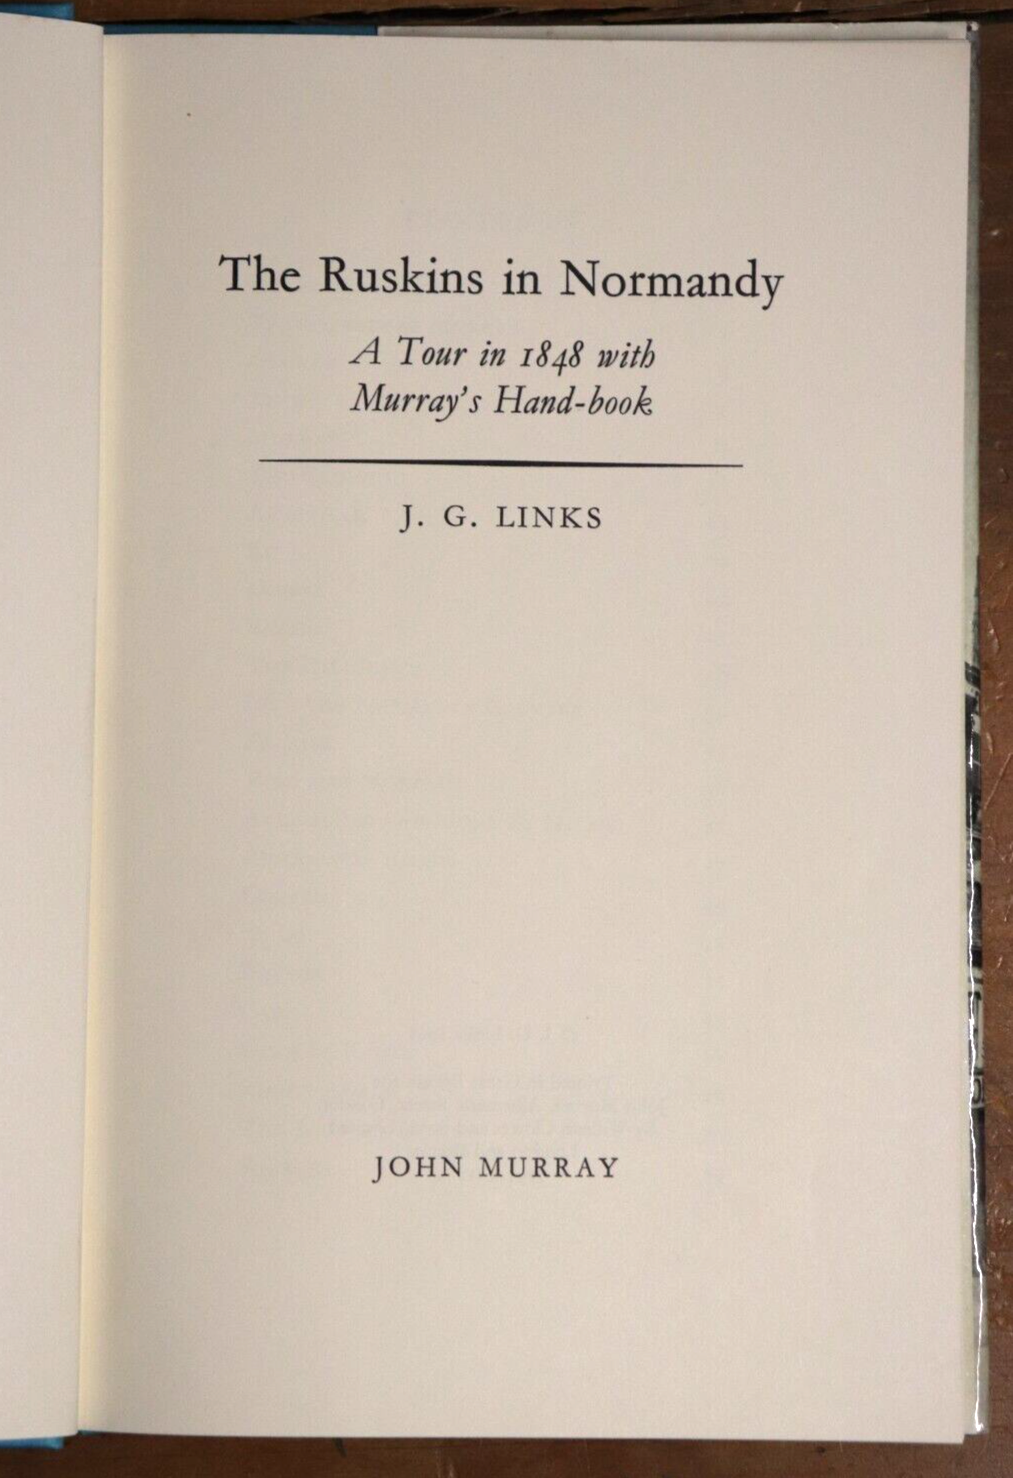 1968 The Ruskins In Normandy by J.G. Links Travel Book France - 0